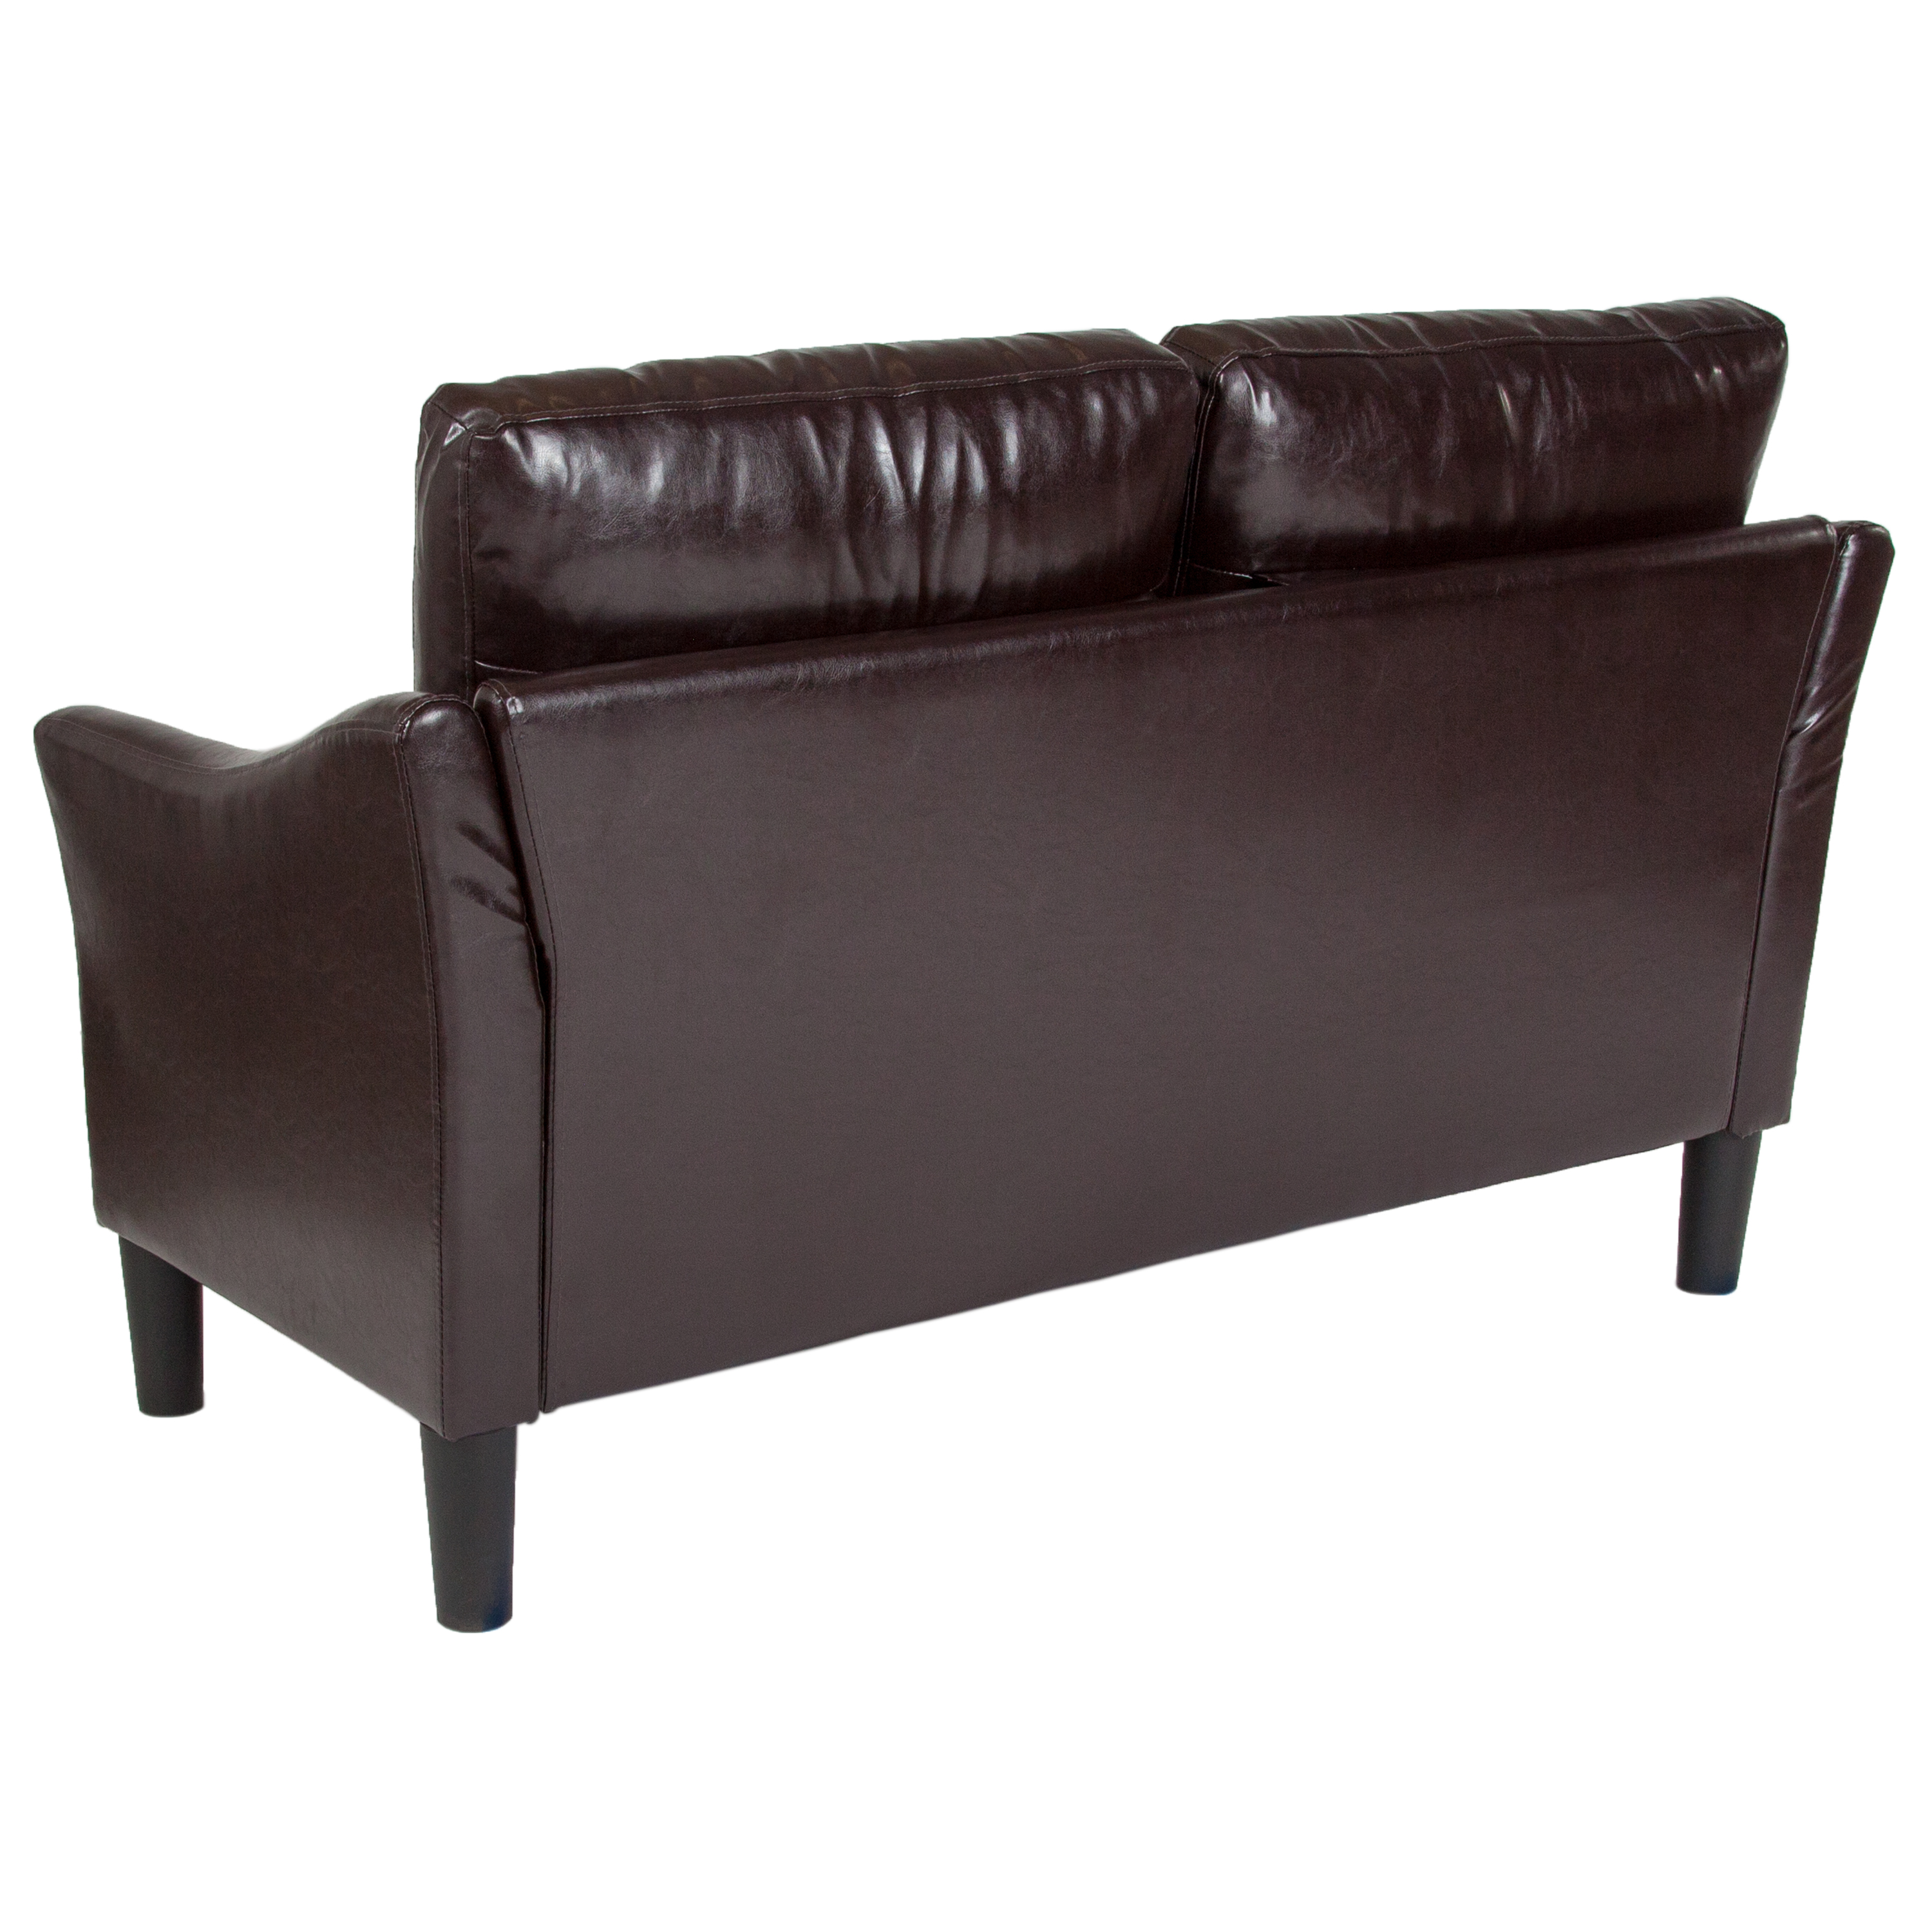 Flash Furniture Asti Upholstered Loveseat in Brown LeatherSoft - image 3 of 5